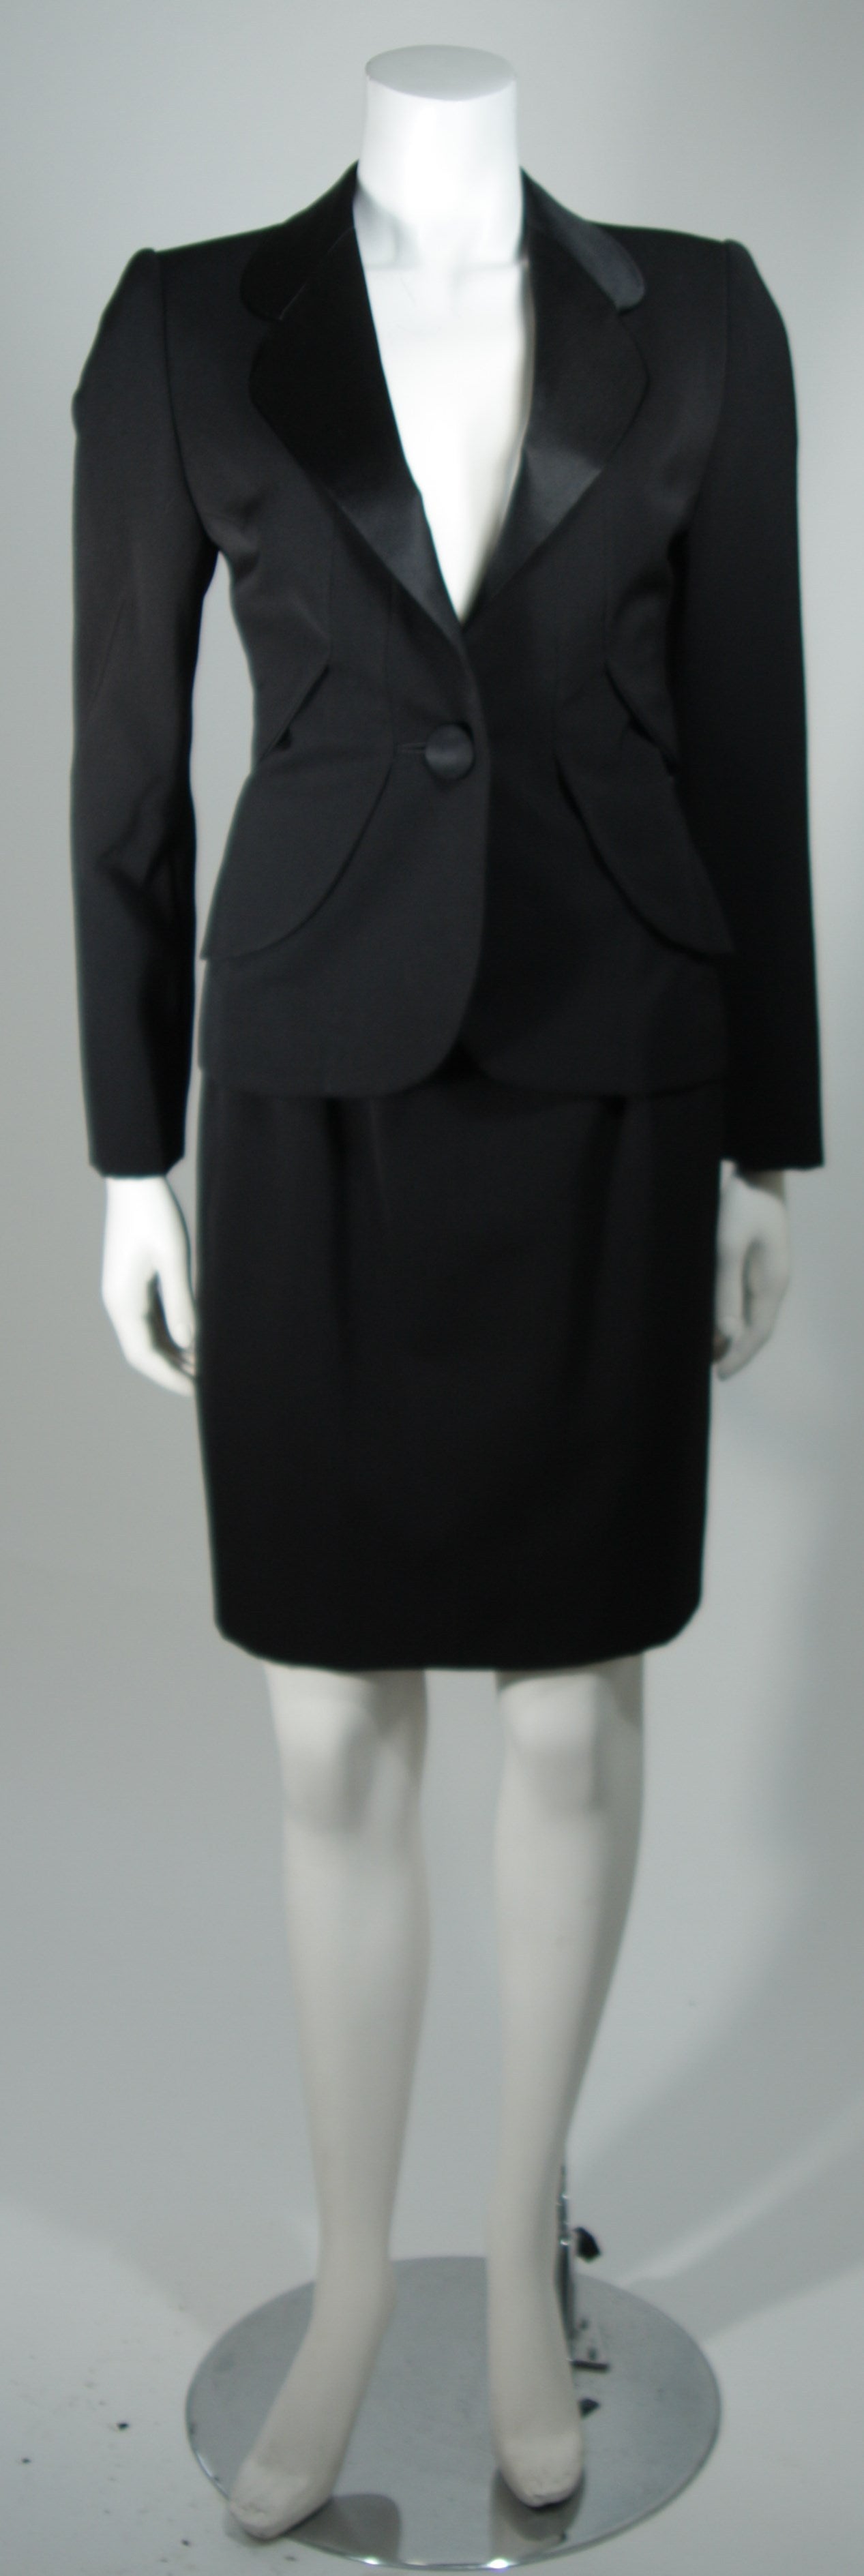 This Galanos Couture design is available for viewing at our Beverly Hills Boutique. We offer a large selection of evening gowns and luxury garments.

This suit is composed of a black wool. The suit features contour streamlines with layered wool.